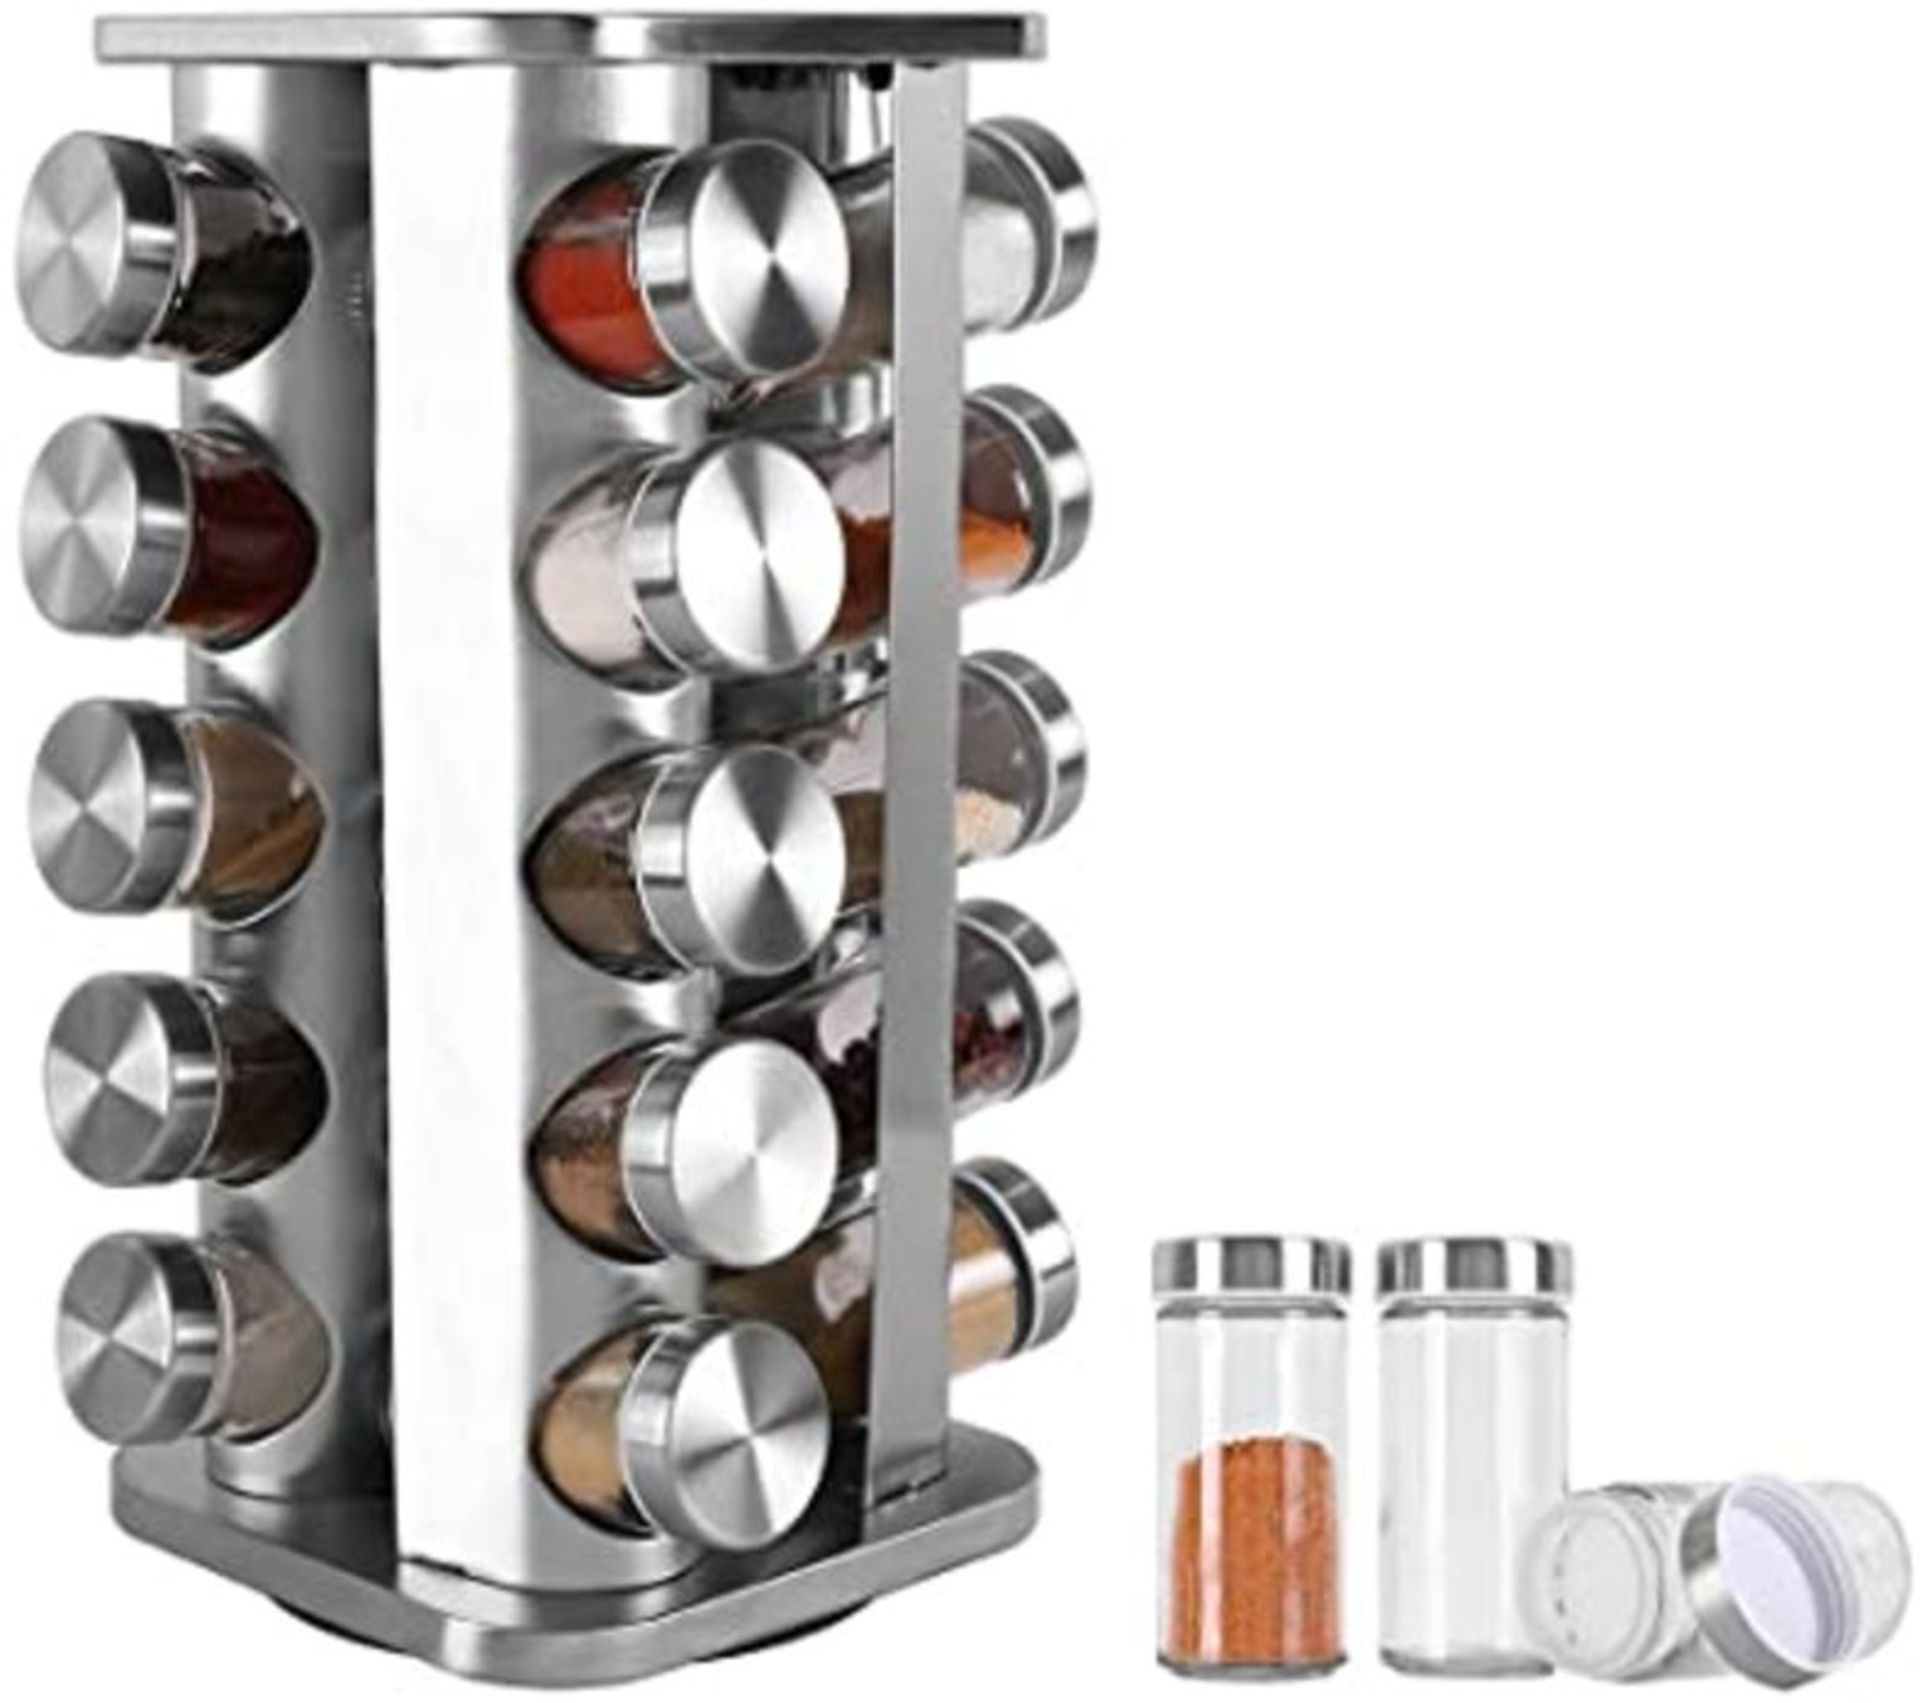 BaoWnylz Square Stainless Steel Spice Rack Rotating Spice Rack has 20 Spice Jars,Which Can be